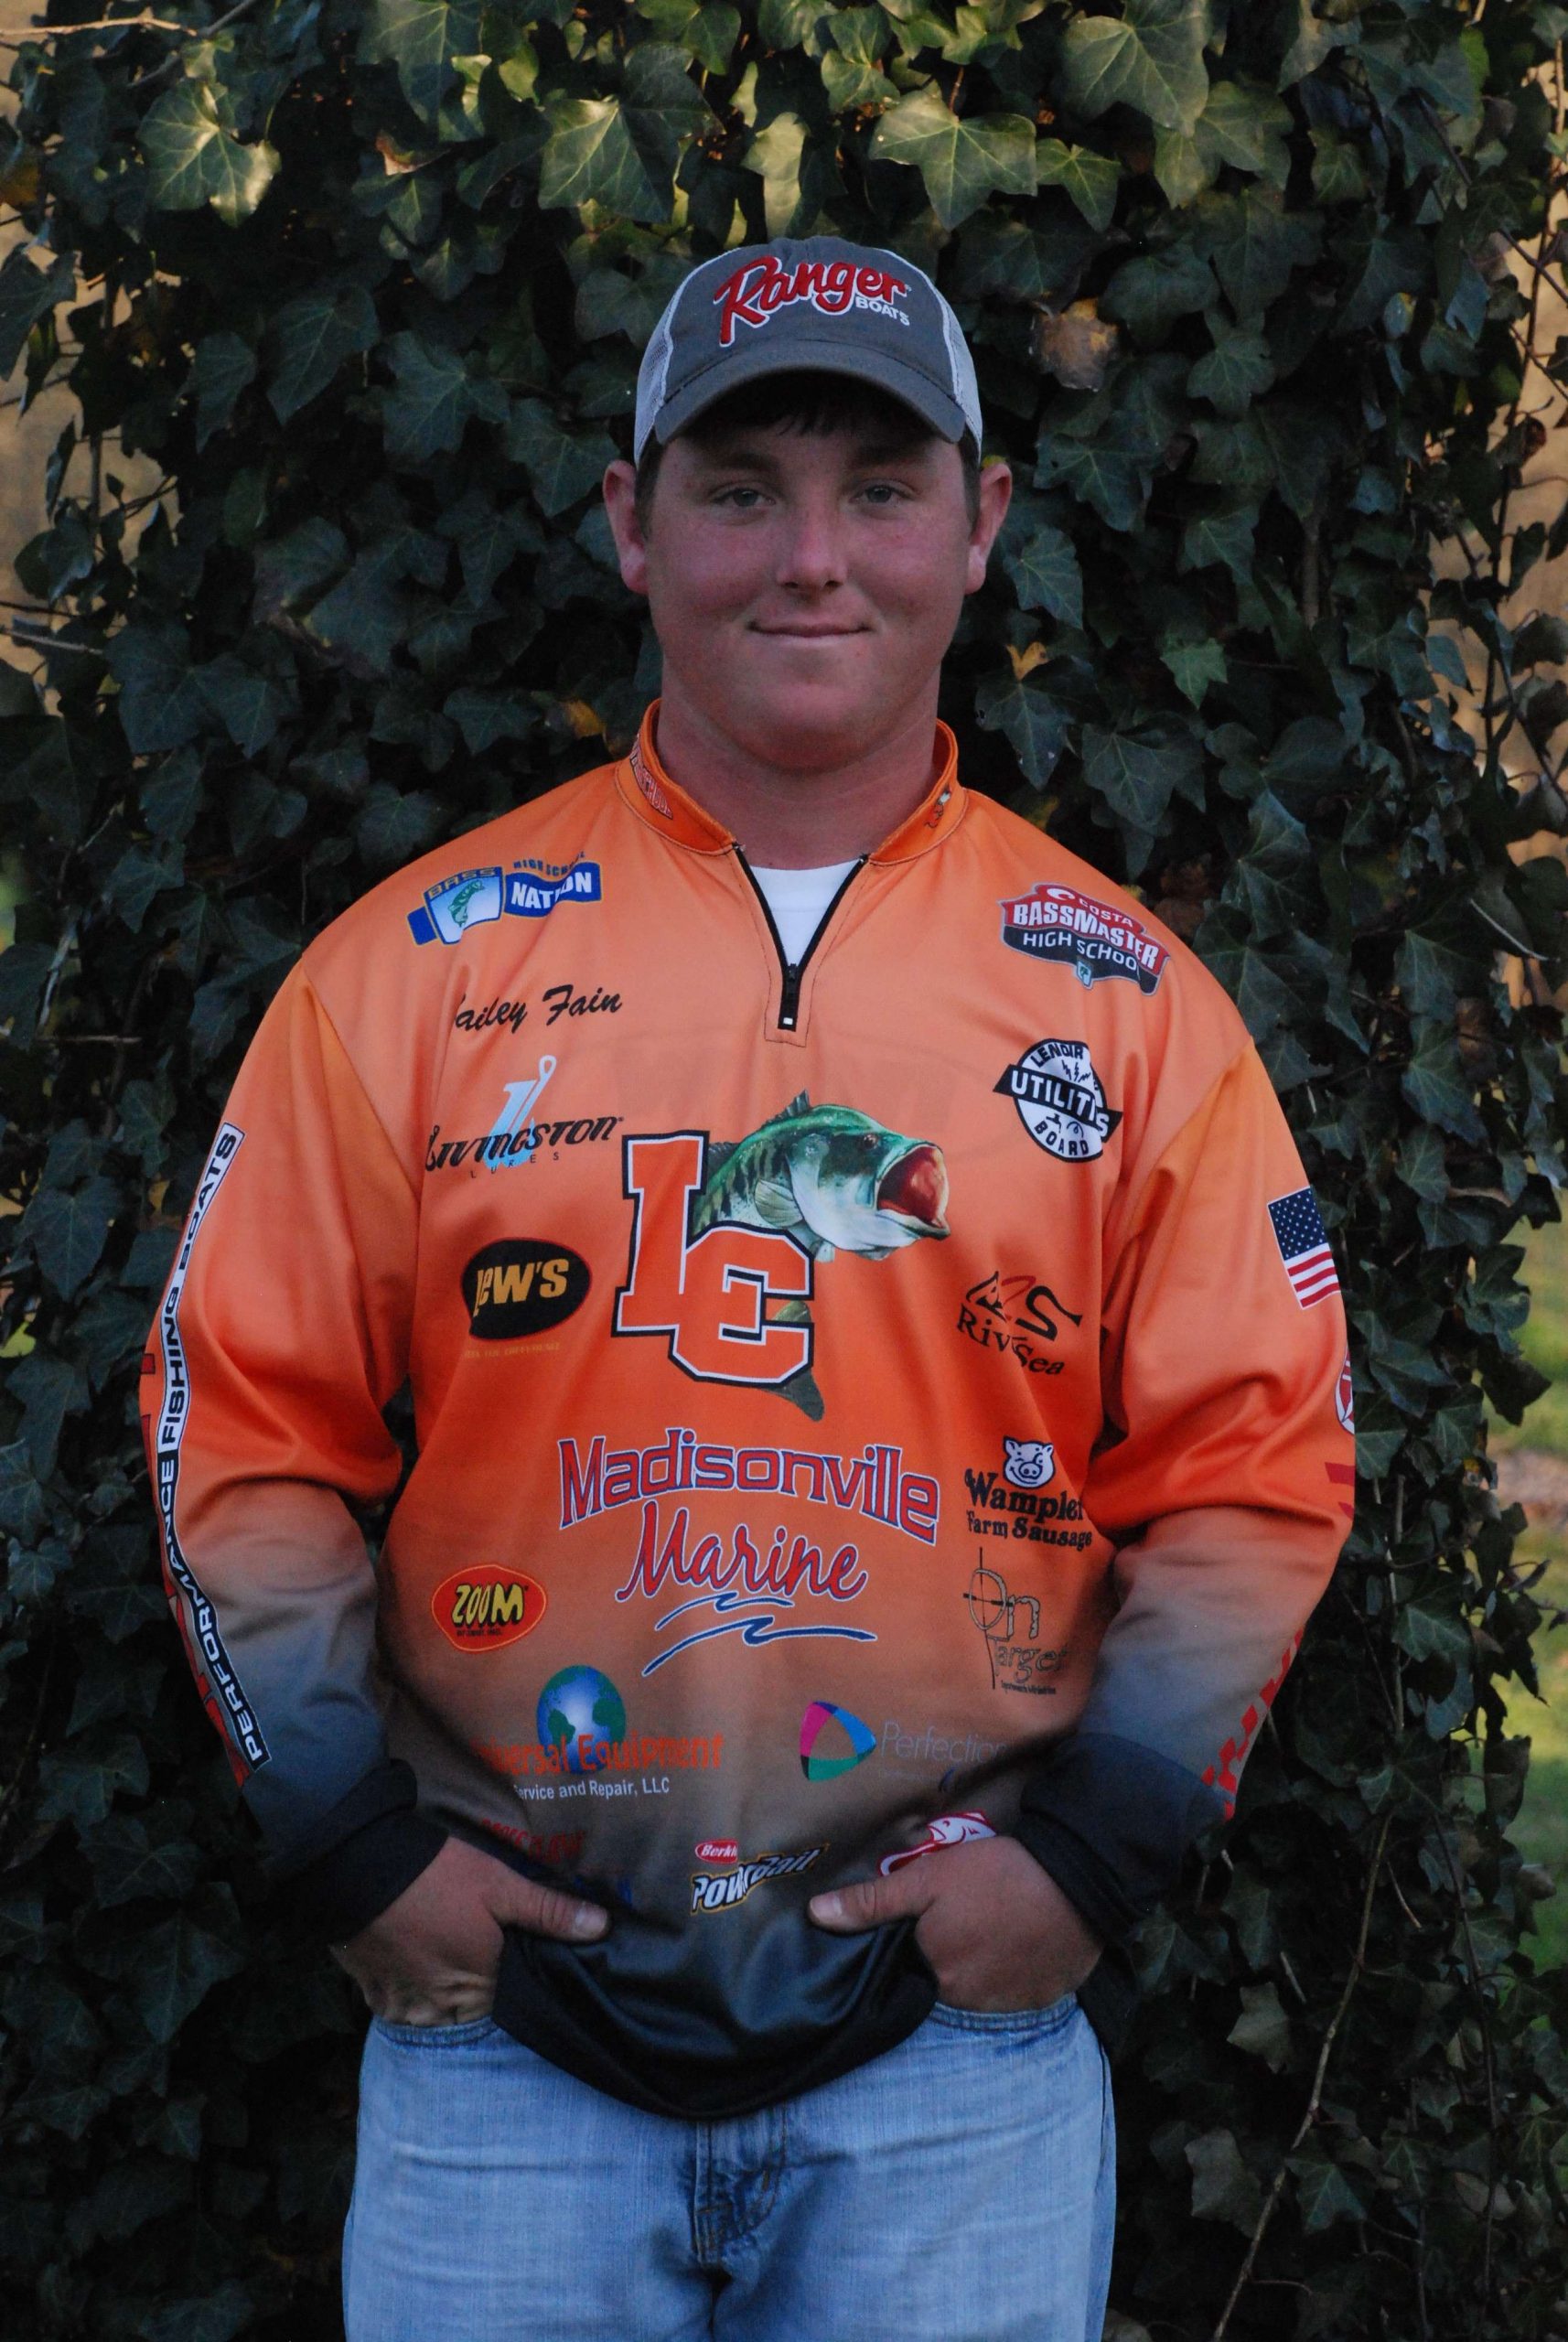 <b>Tennessee: Baily Fain</b><br>
Fain started the bass fishing team at Lenoir City High School in Tennessee. He has nine wins to his credit, including seven high school club tournaments. He also earned the Big Bass award on Day 2 of the Costa Bassmaster High School Championship National Championship on Kentucky Lake. Fain is always willing to help members of the team by taking them fishing in his boat and sharing tips. With Fainâs leadership, his high school club now has 32 members.
